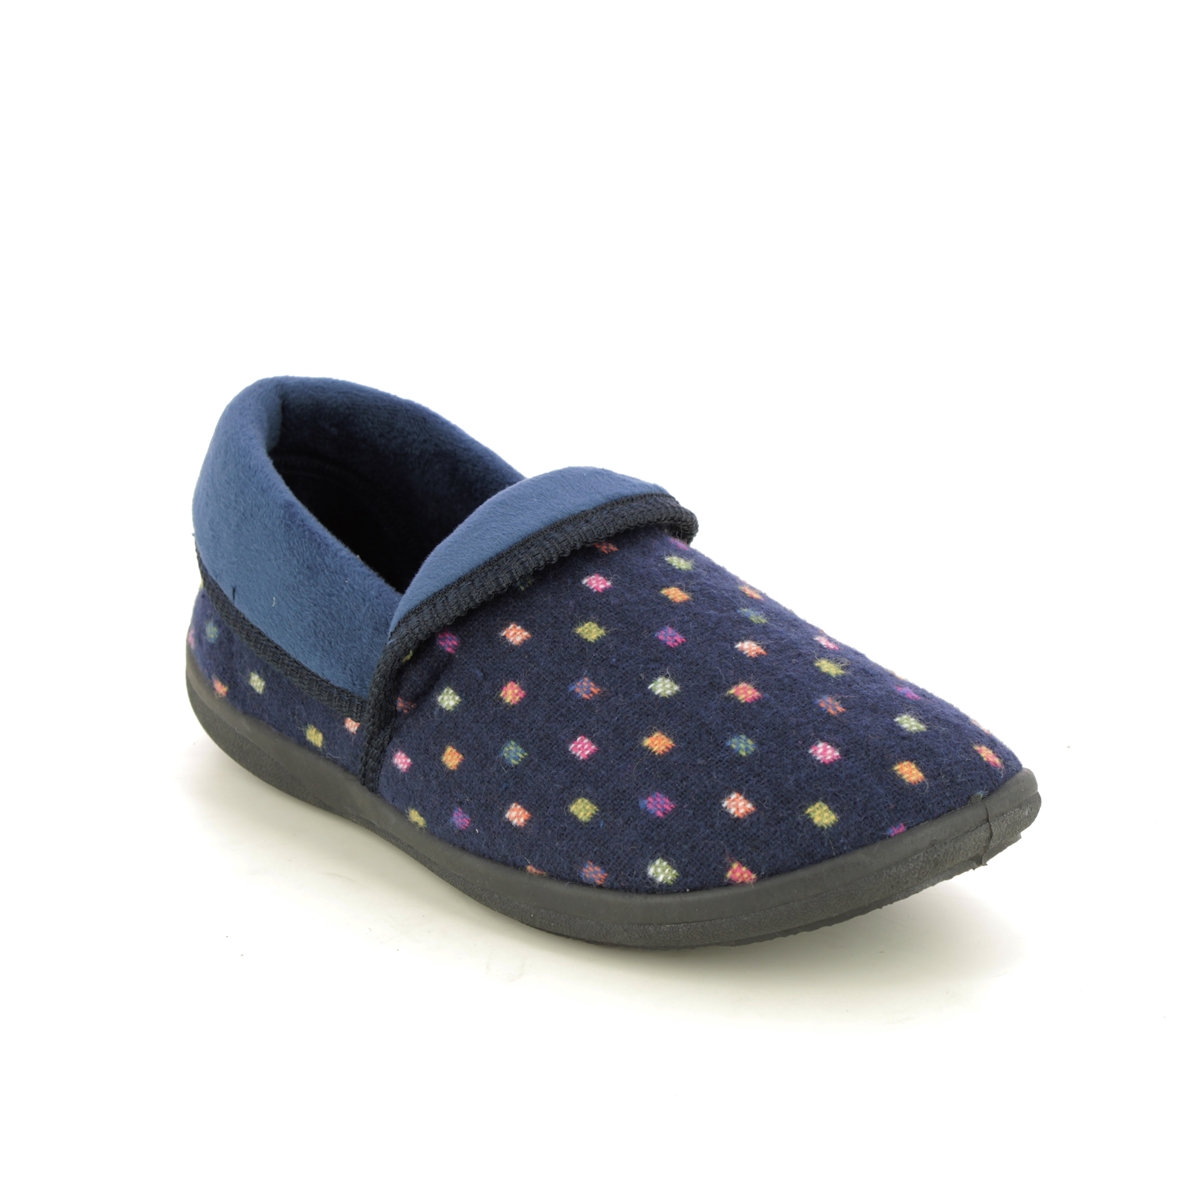 Padders Mellow Ee Fit Navy Womens slippers 460-4076 in a Plain Textile in Size 4